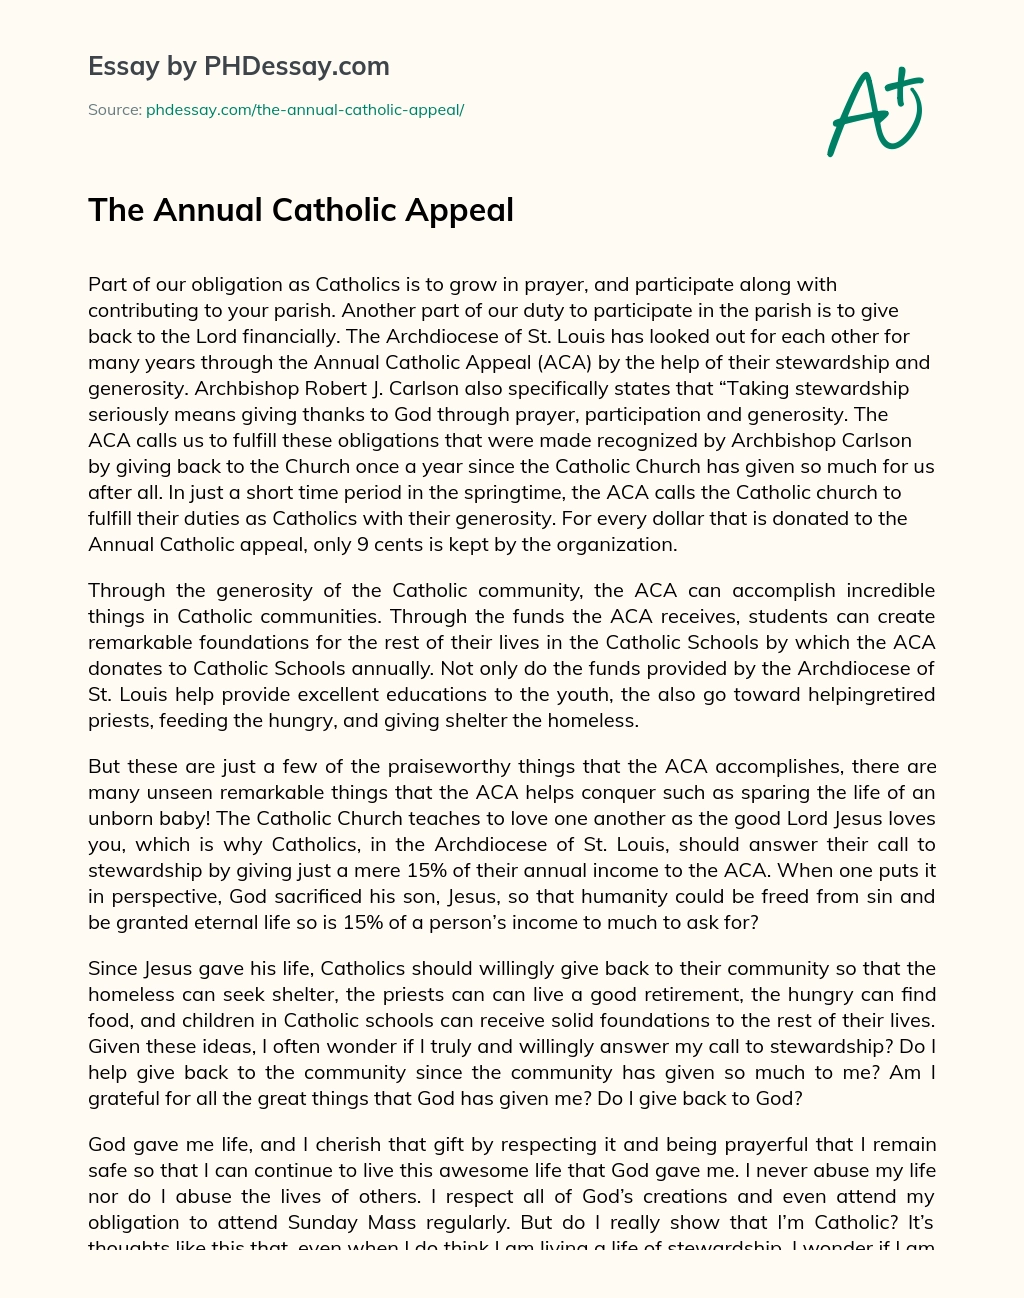 The Annual Catholic Appeal essay